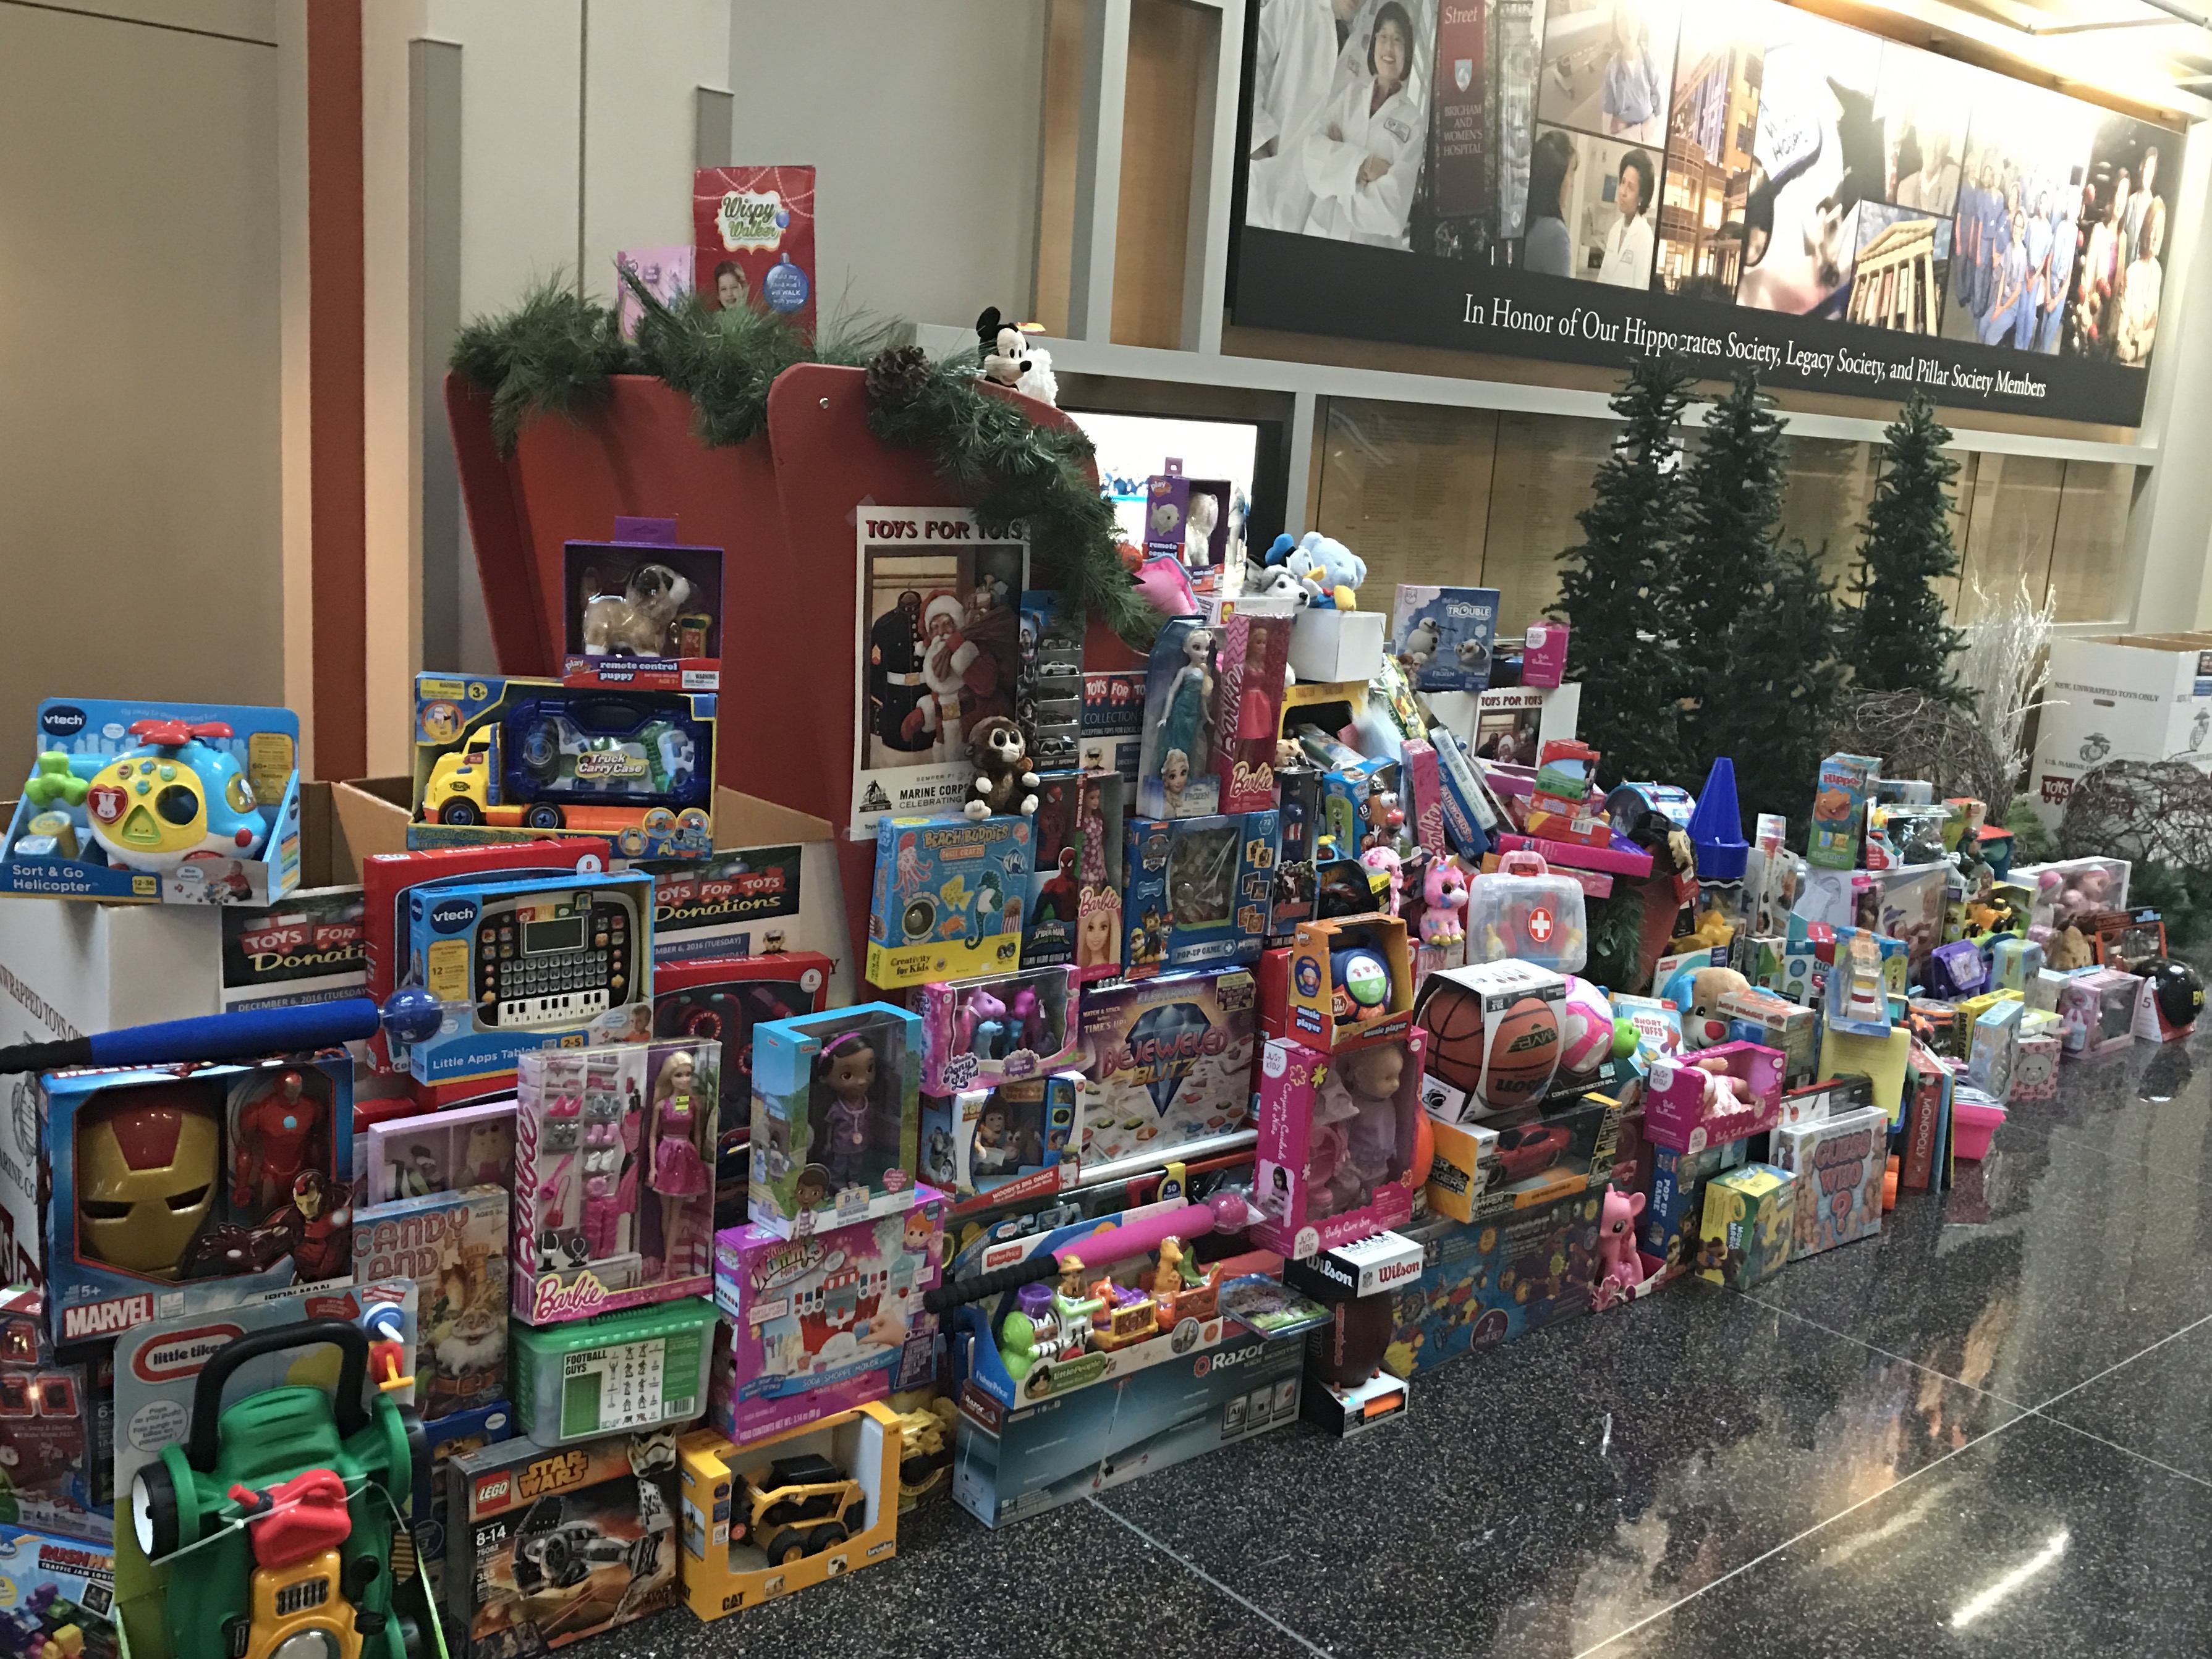 A sleigh in the main lobby overflows with donations for Toys for Tots.